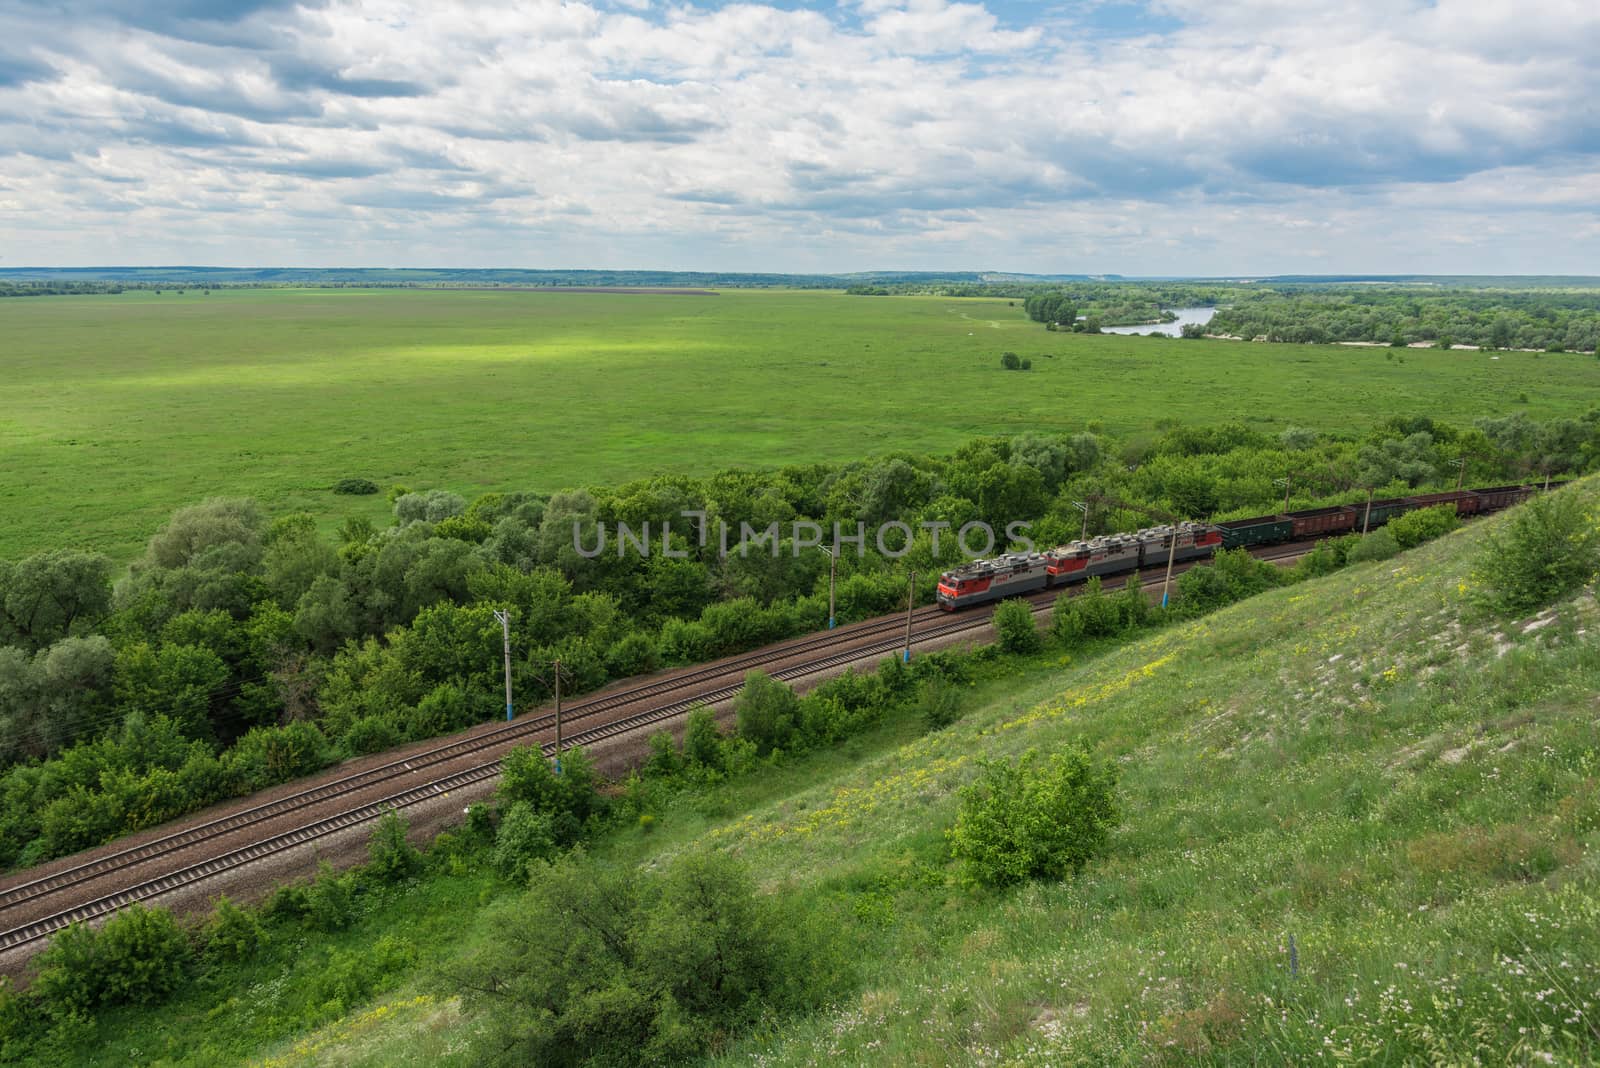 Freight train with locomotives passing by rail in Russia, along the typical Russian landscape, top view.